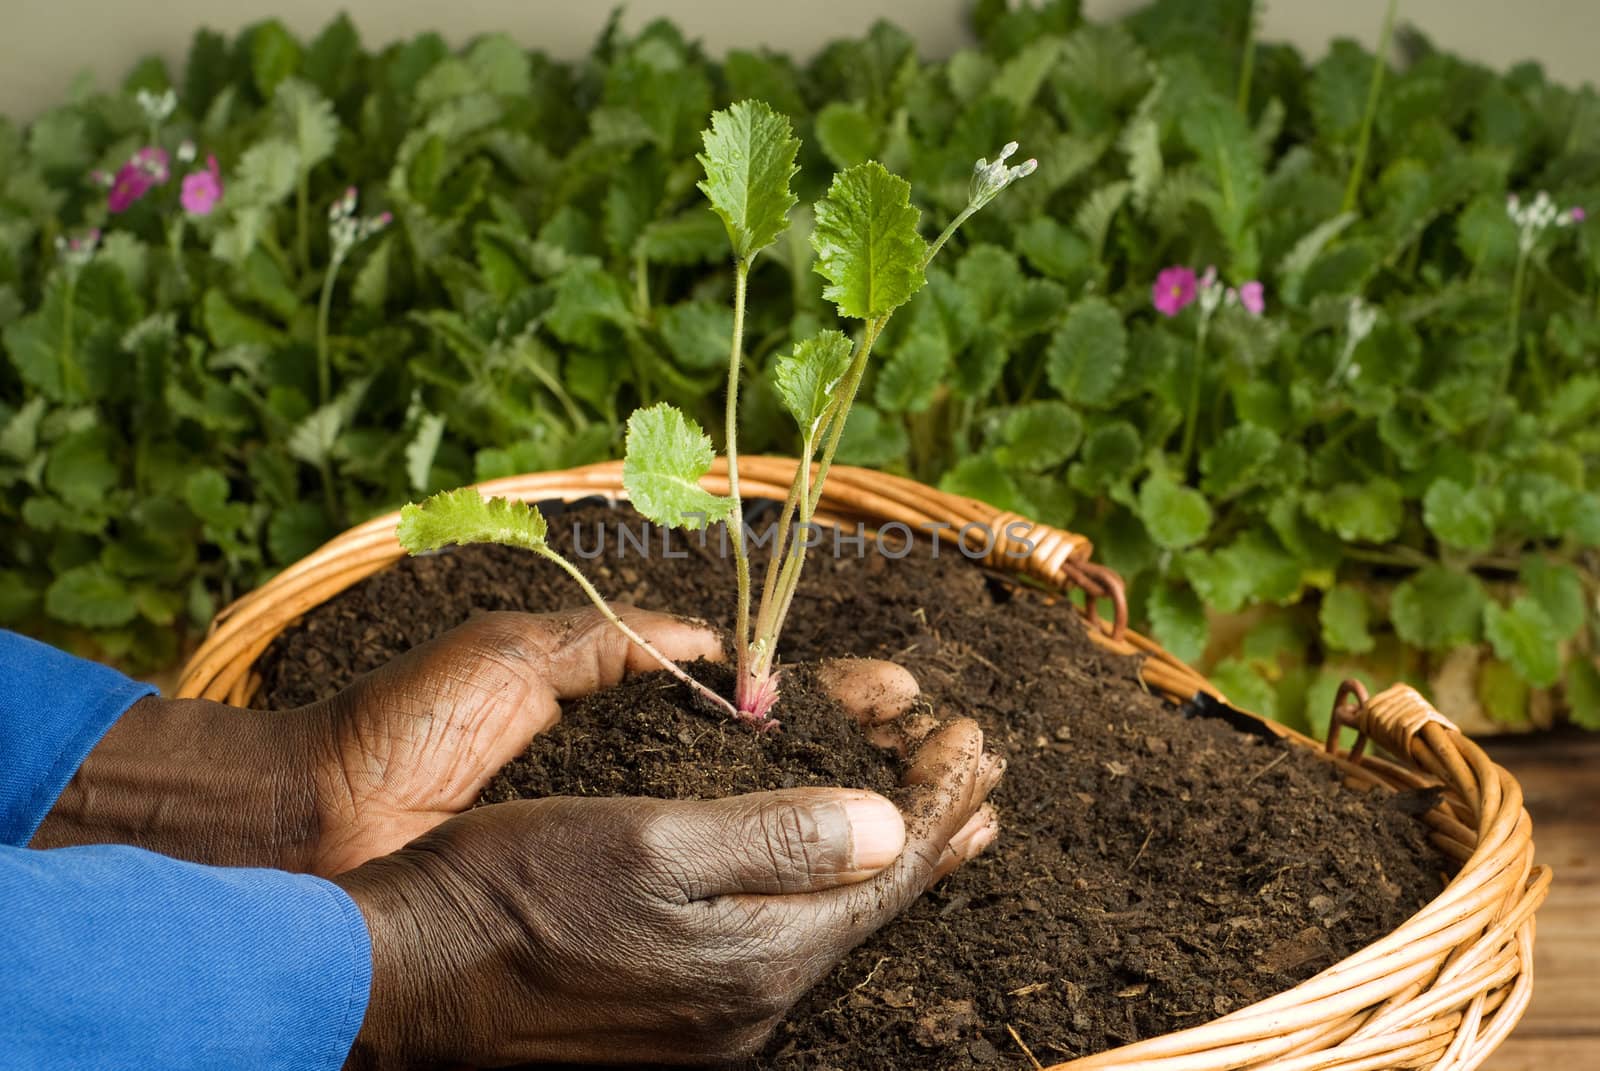 African American Gardener Planting New Plant in Basket Filled with Soil